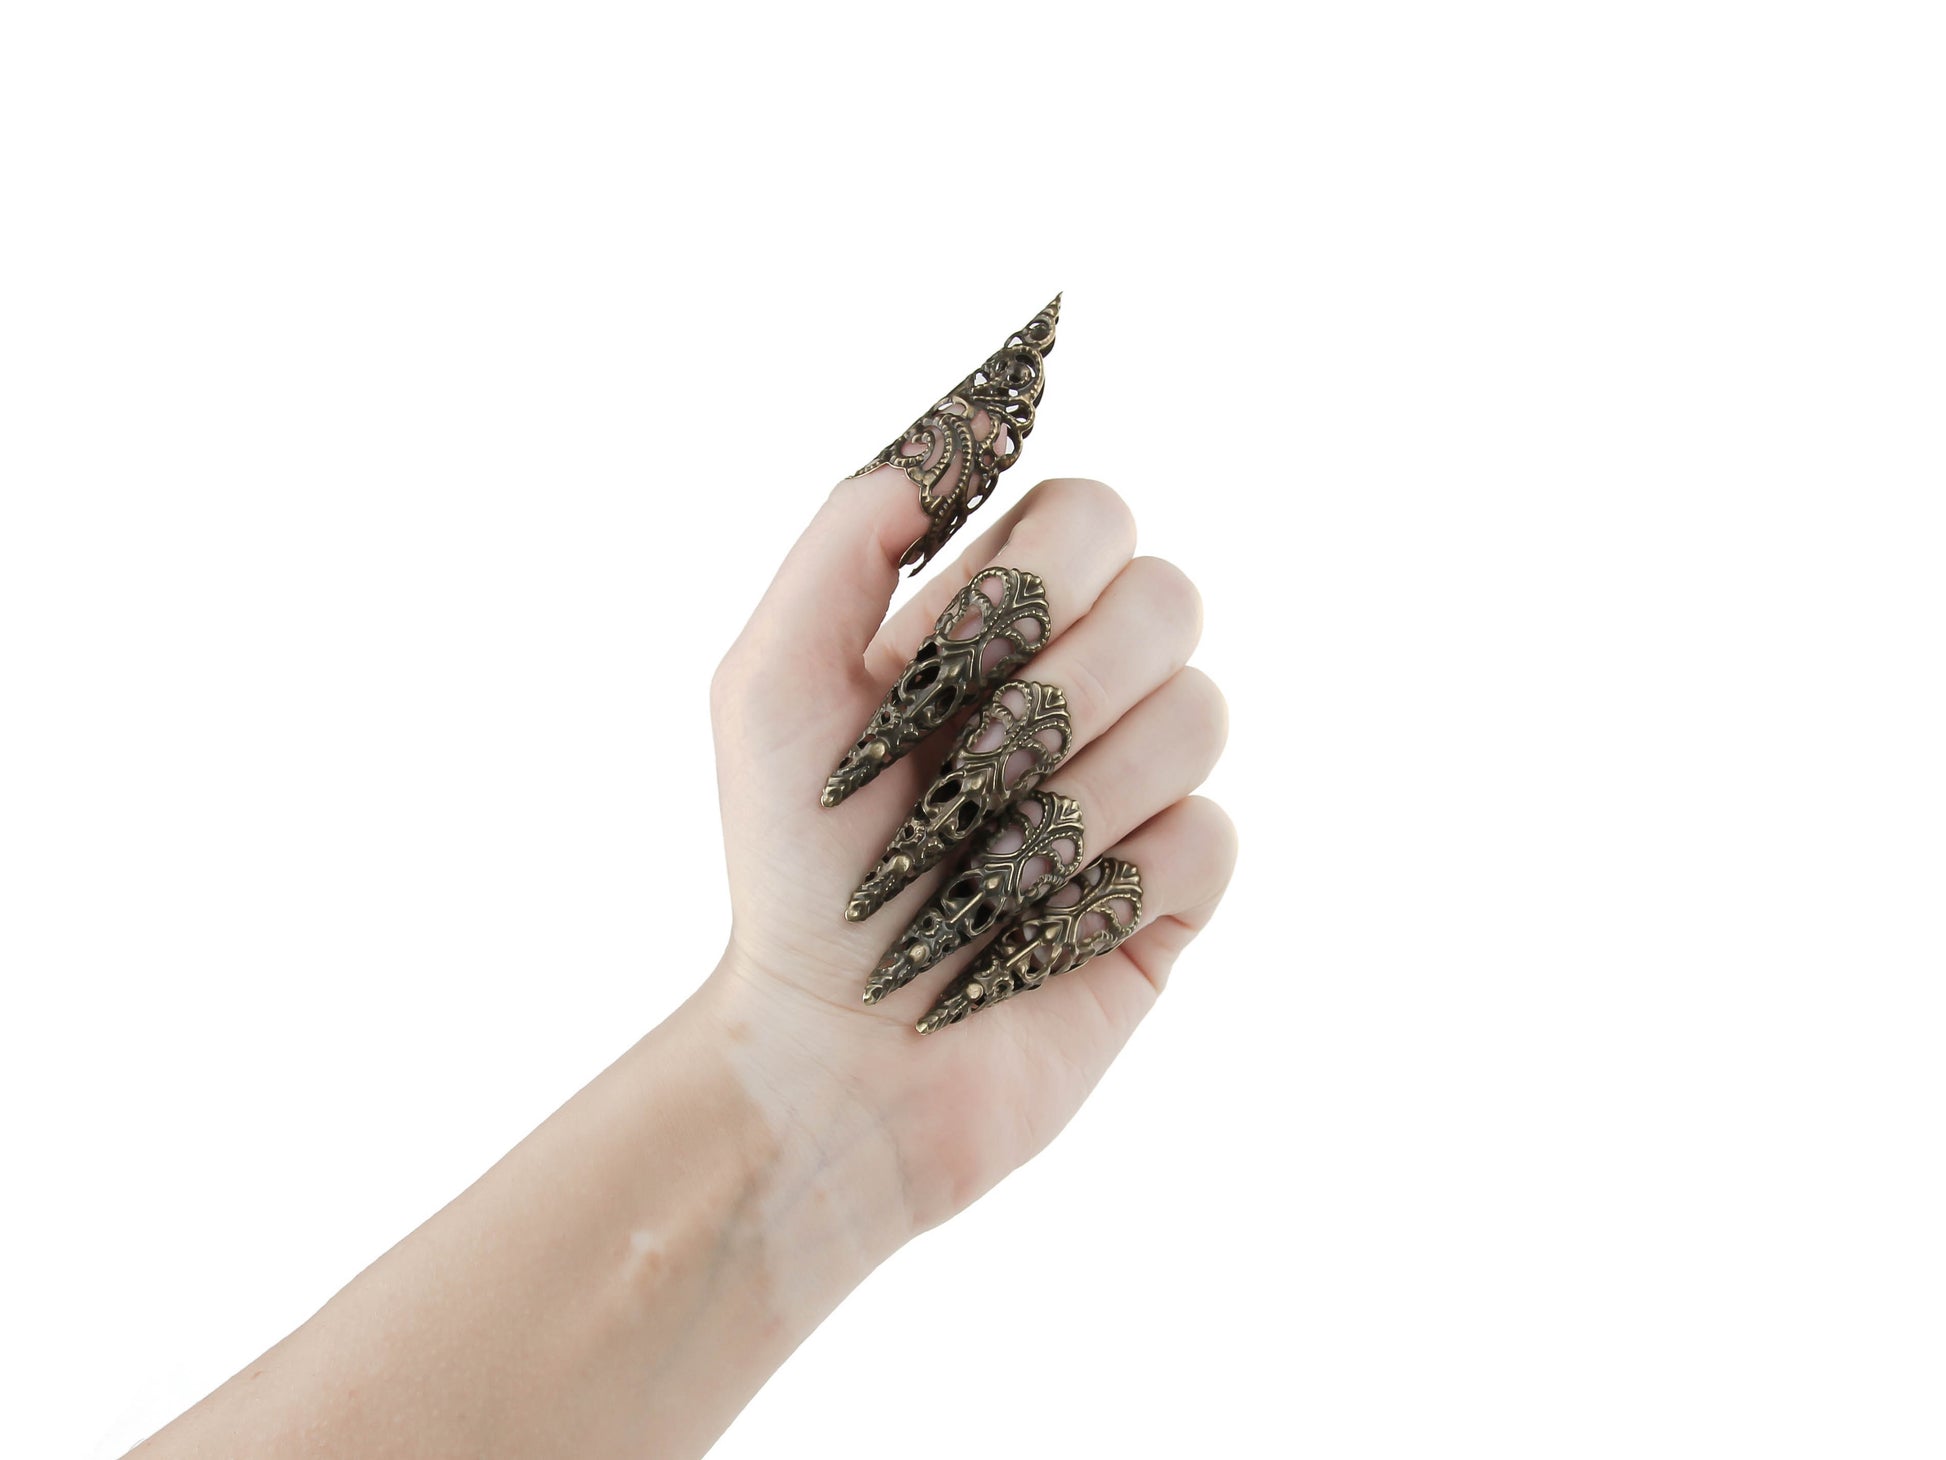 Elegant long bronze finger claws jewelry by Myril Jewels, showcasing a neo-gothic design perfect for those with a dark, avant-garde fashion sense. Ideal for Halloween, they're a goth-chic accessory for everyday wear, festivals, and rave parties. A bold gift for the goth girlfriend or a unique friend